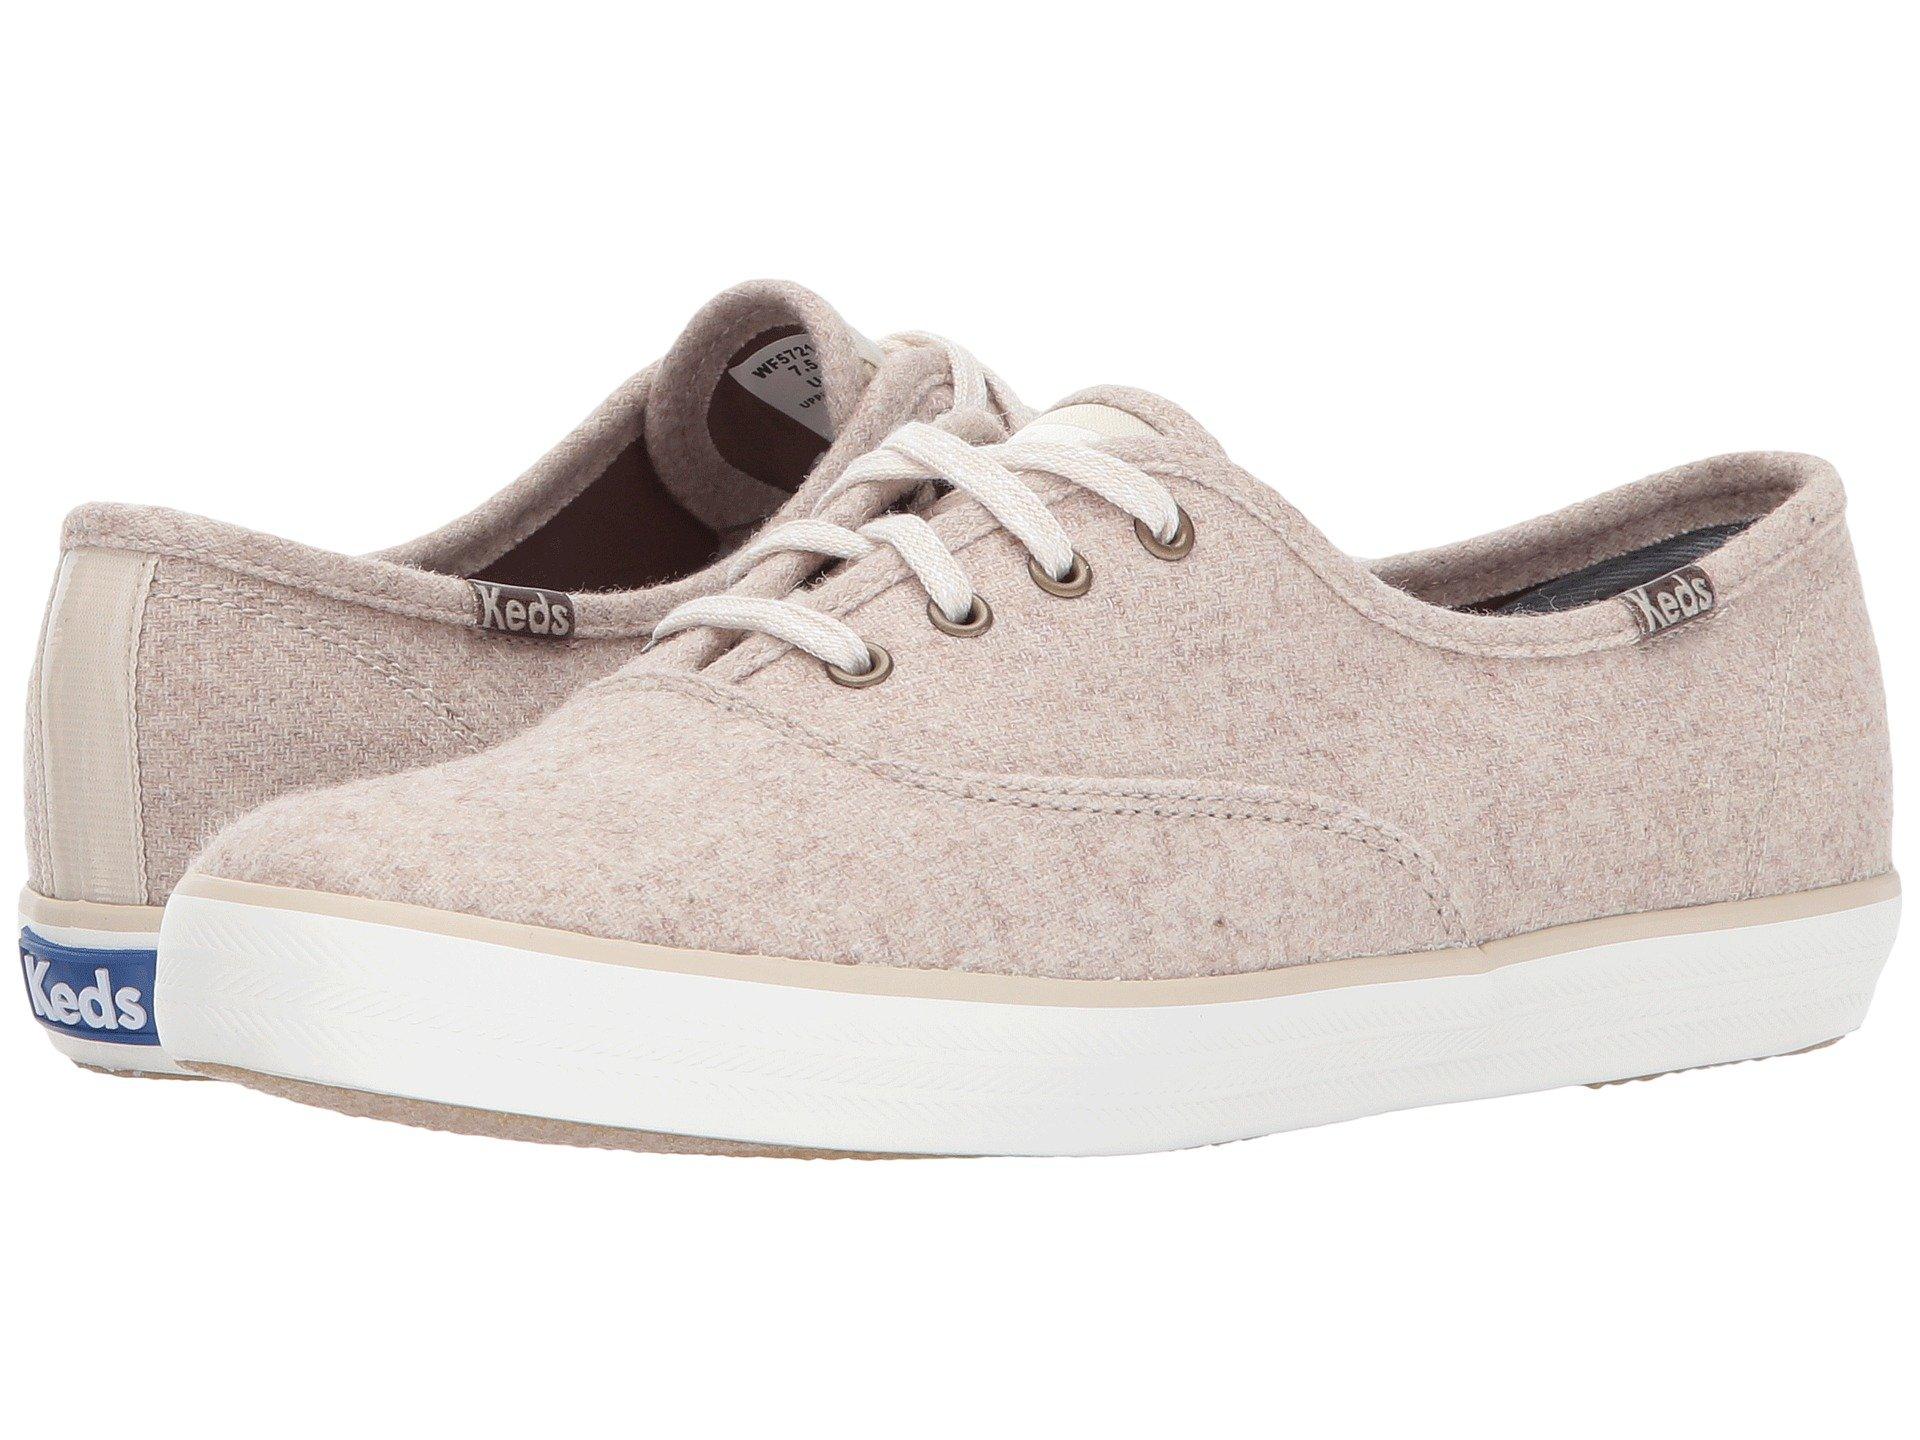 Keds Champion Wool In Oatmeal | ModeSens